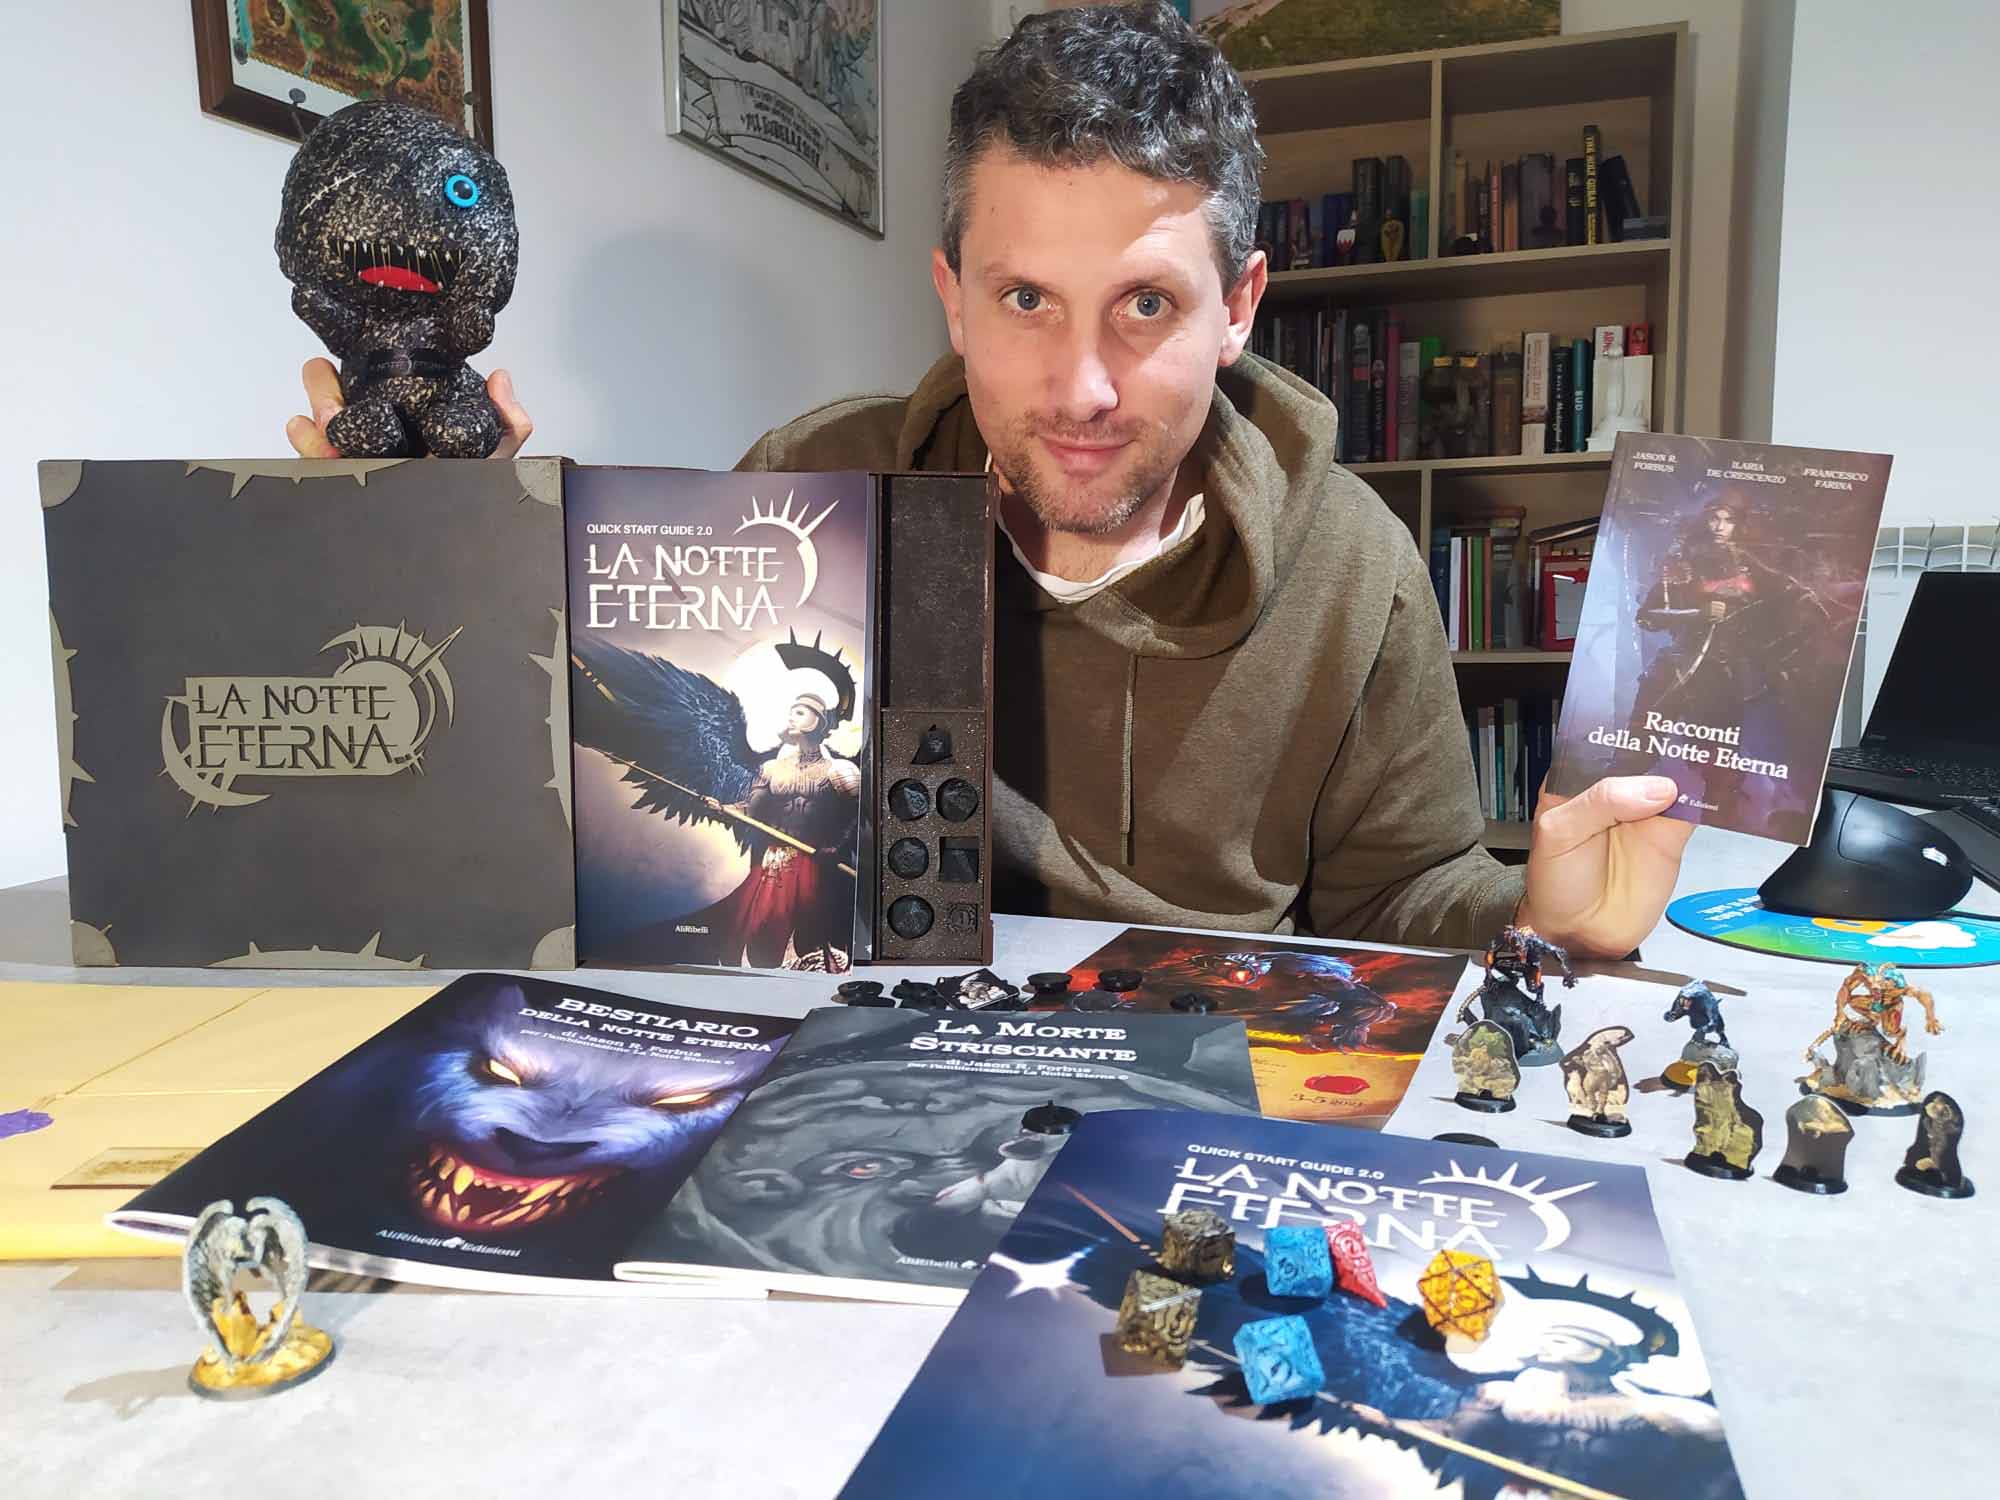 Jason Forbus, creator of La Notte Eterna, showcasing all the add-ons from the Kickstarter campaign.